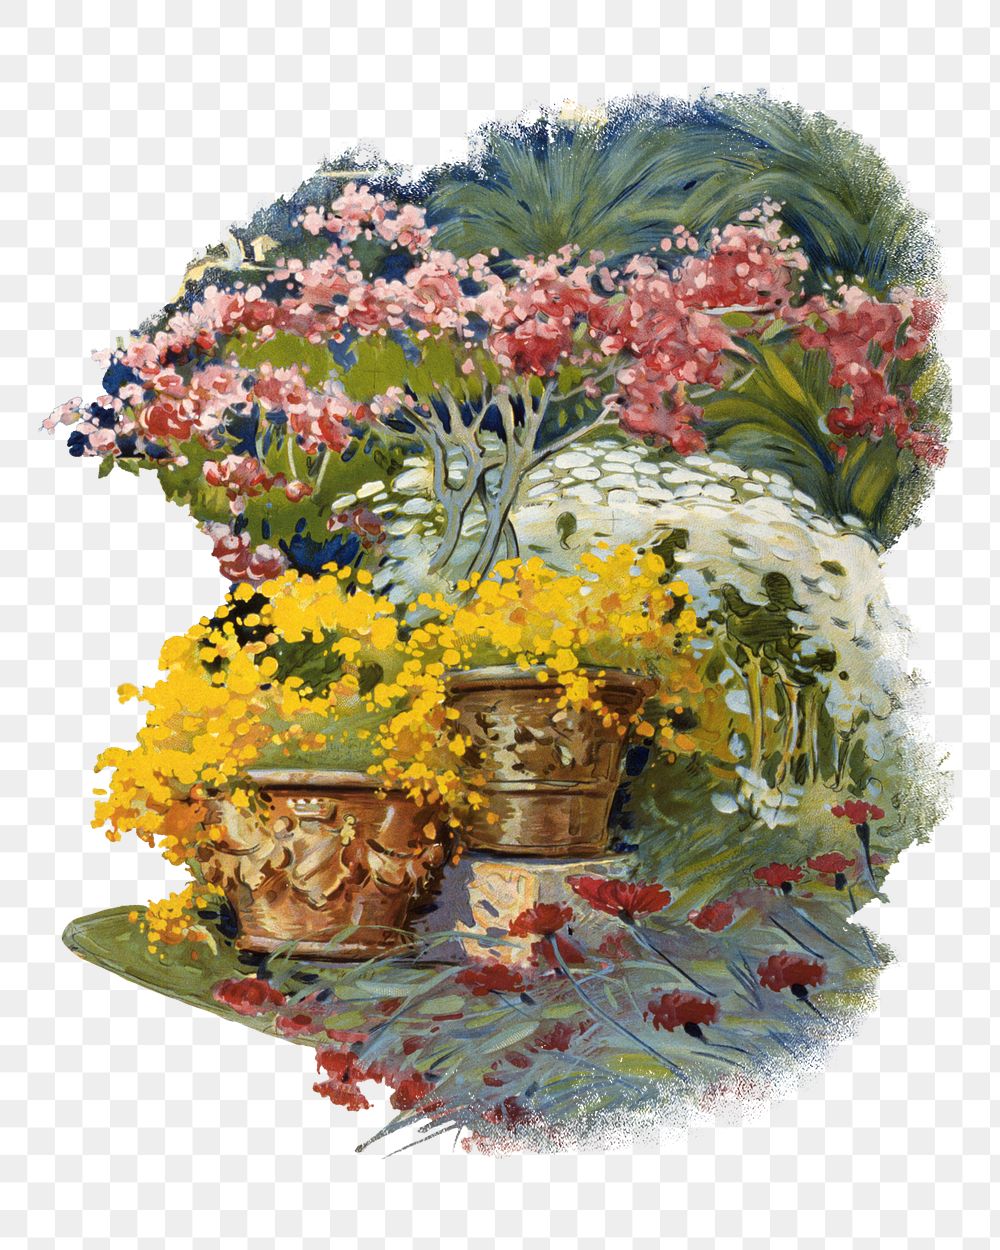 Potted flowers png watercolor illustration element, transparent background. Remixed from vintage artwork by rawpixel.